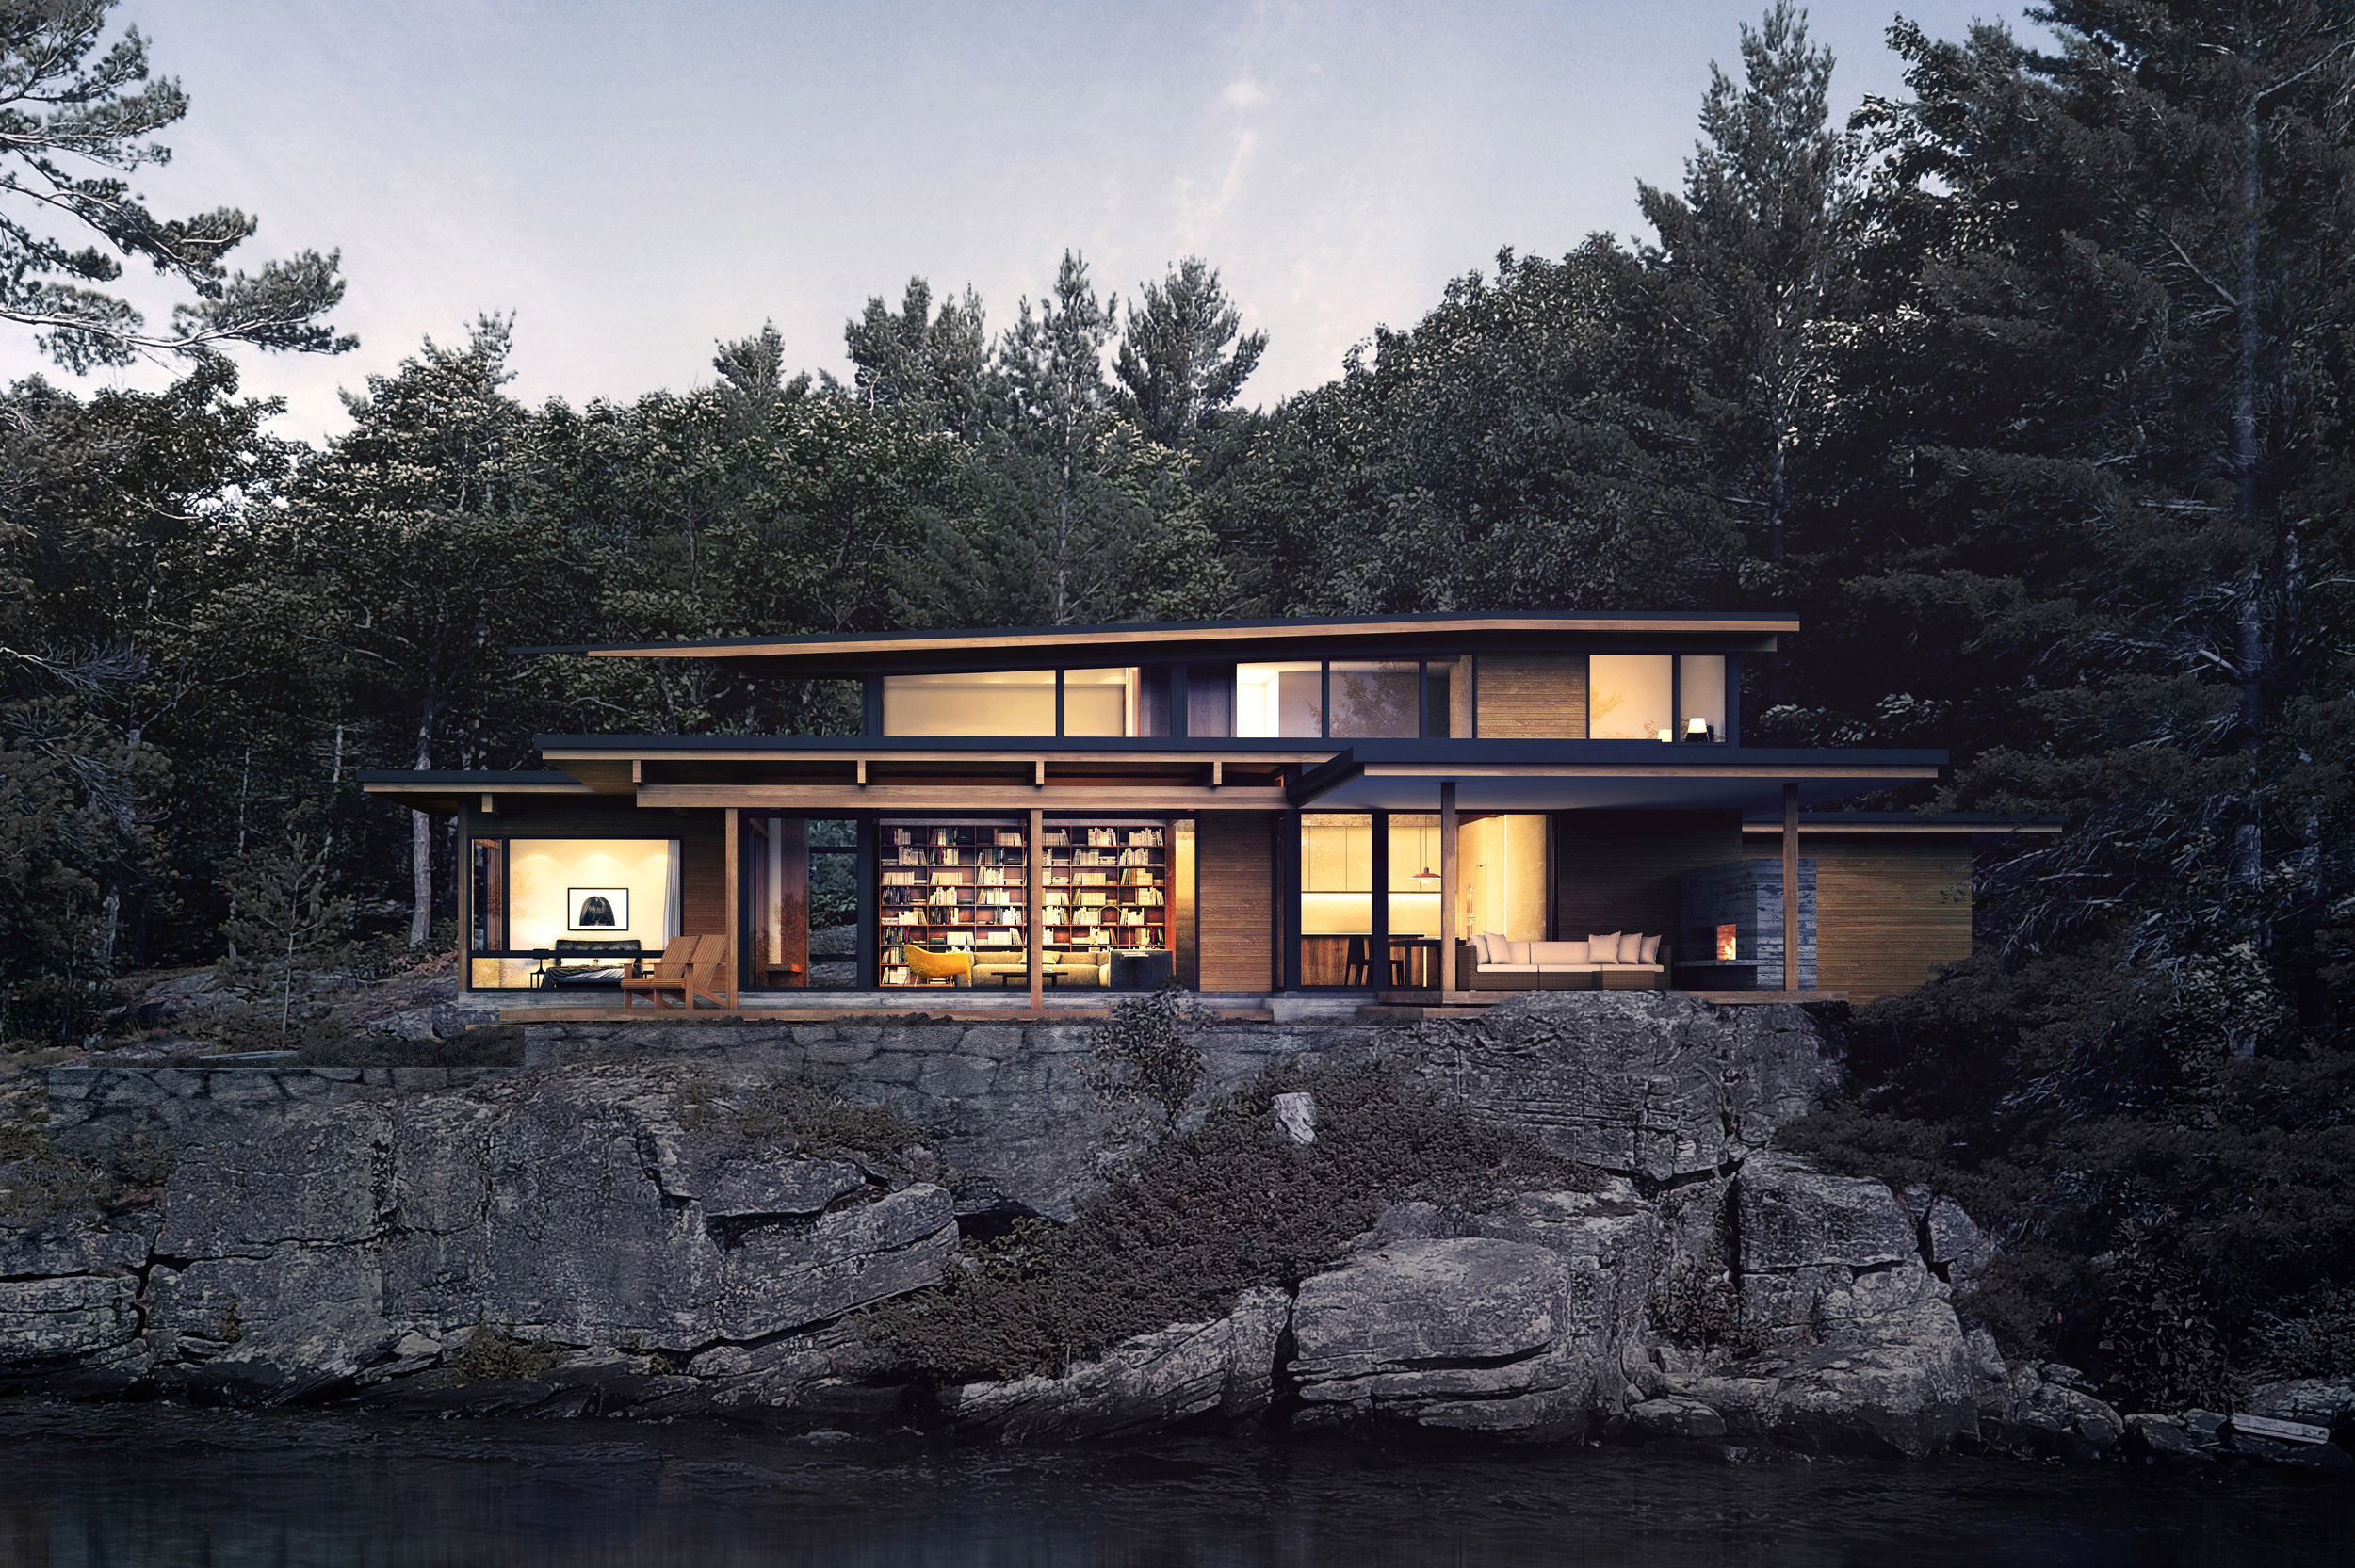 Rendering of a modern home, perched on a rocky landscape, overlooking the water; an extensive library is visible